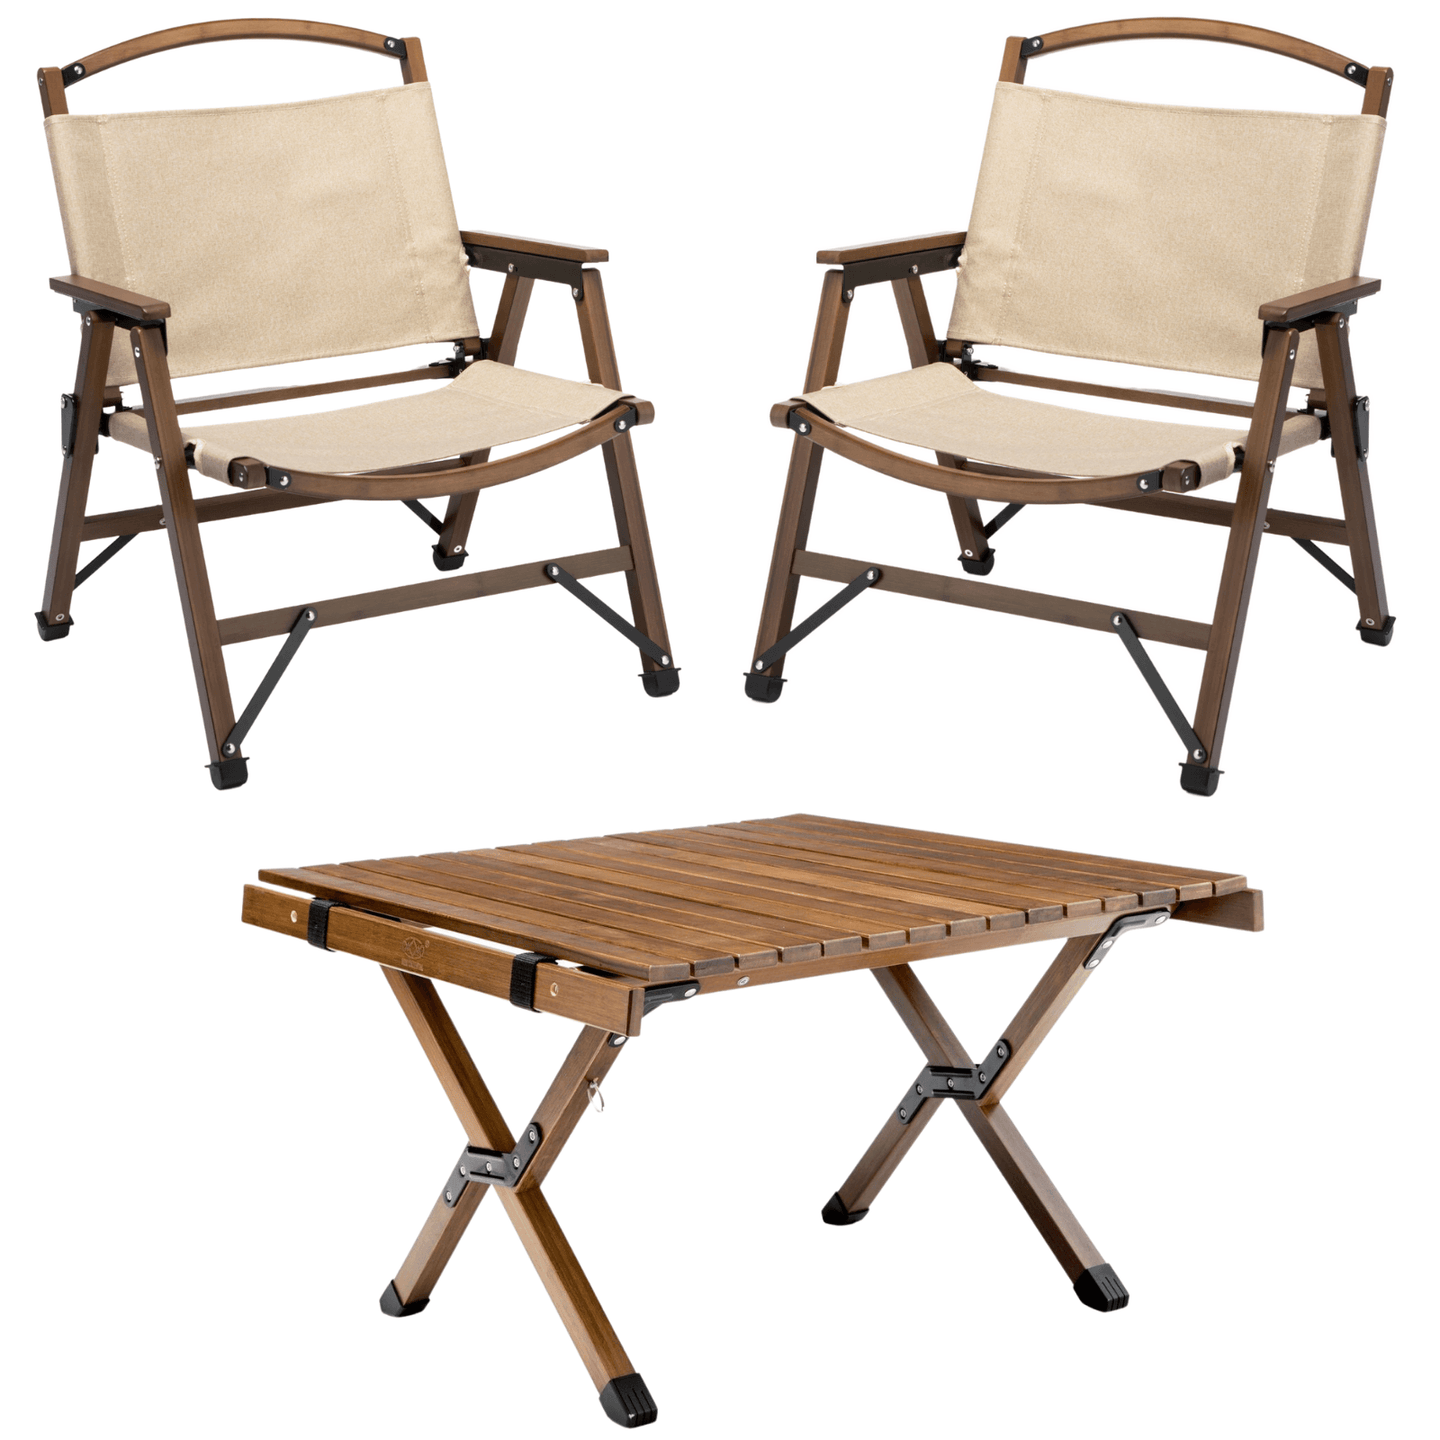 Buy Bamboo Foldable Camping Table + 2 Chairs Waterproof Wood Wooden Travel Set Kit discounted | Products On Sale Australia